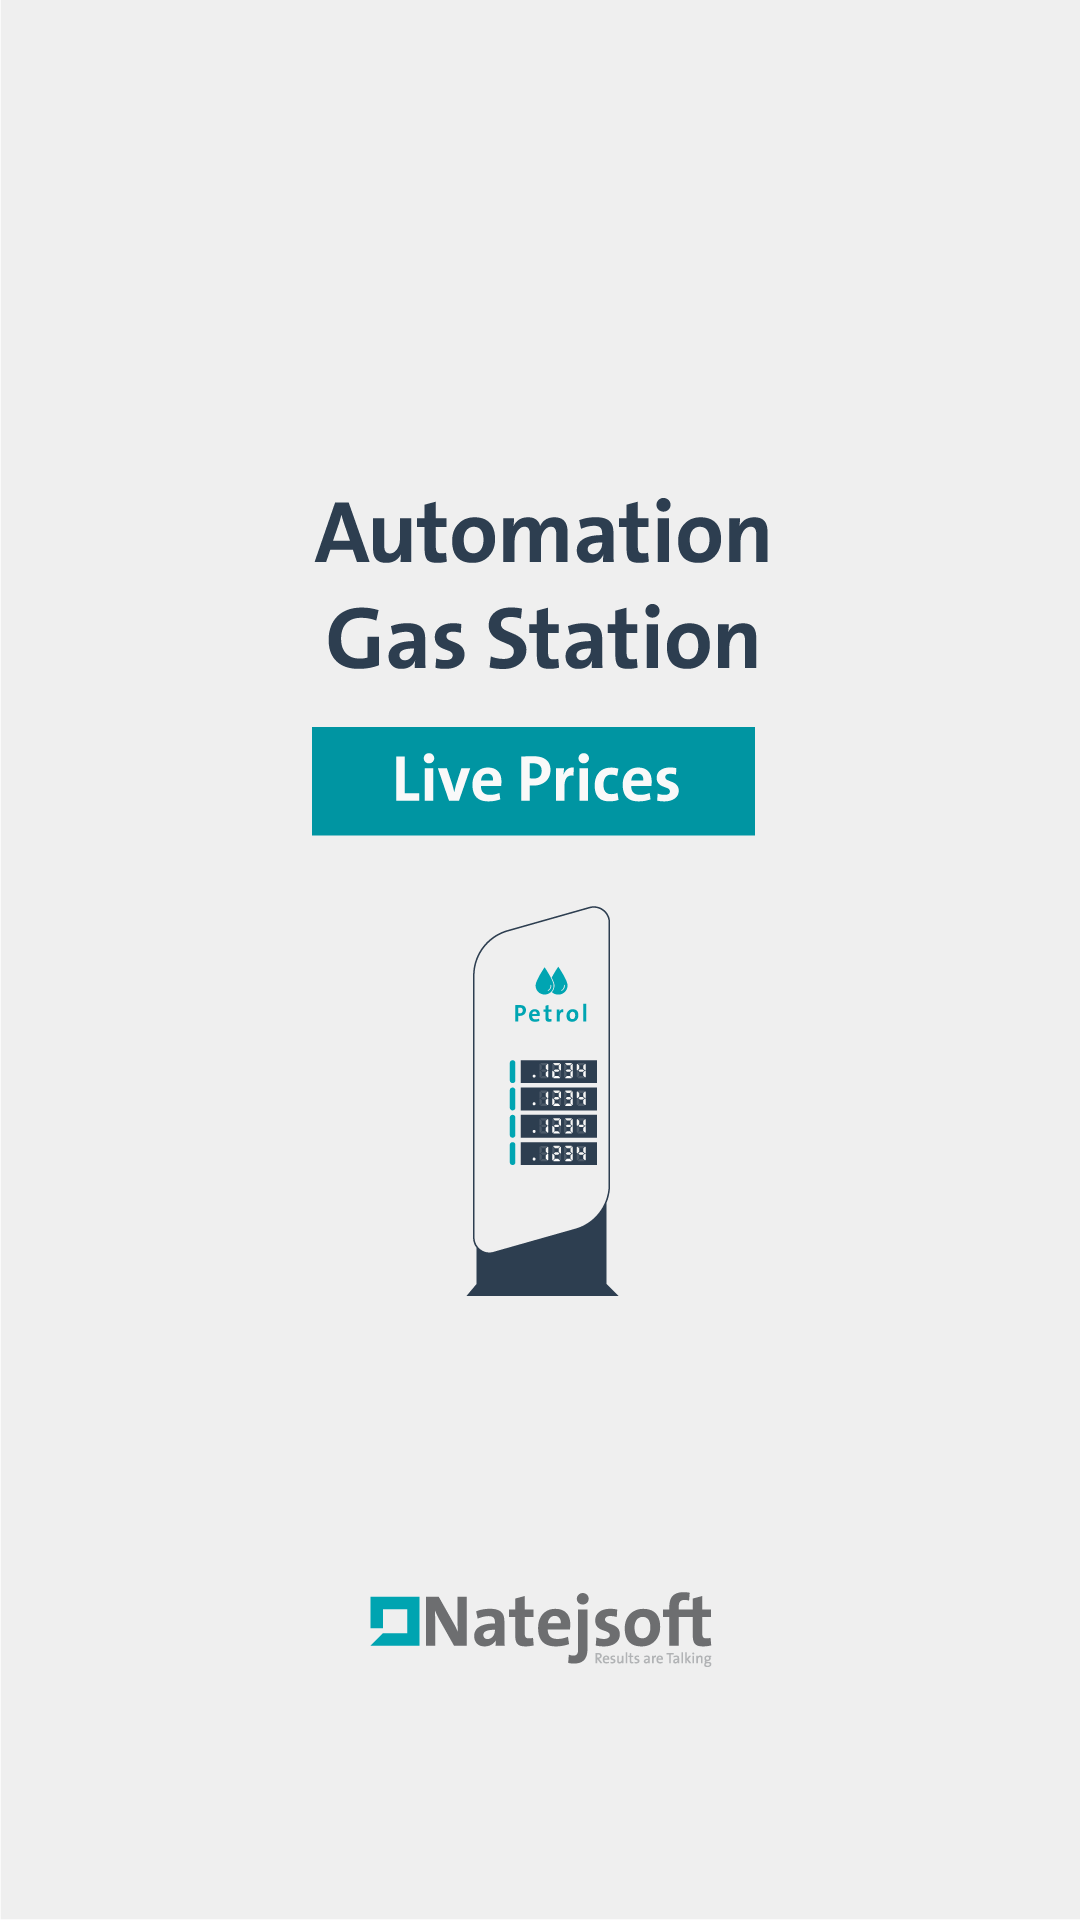 Automation Gas Station Live Prices